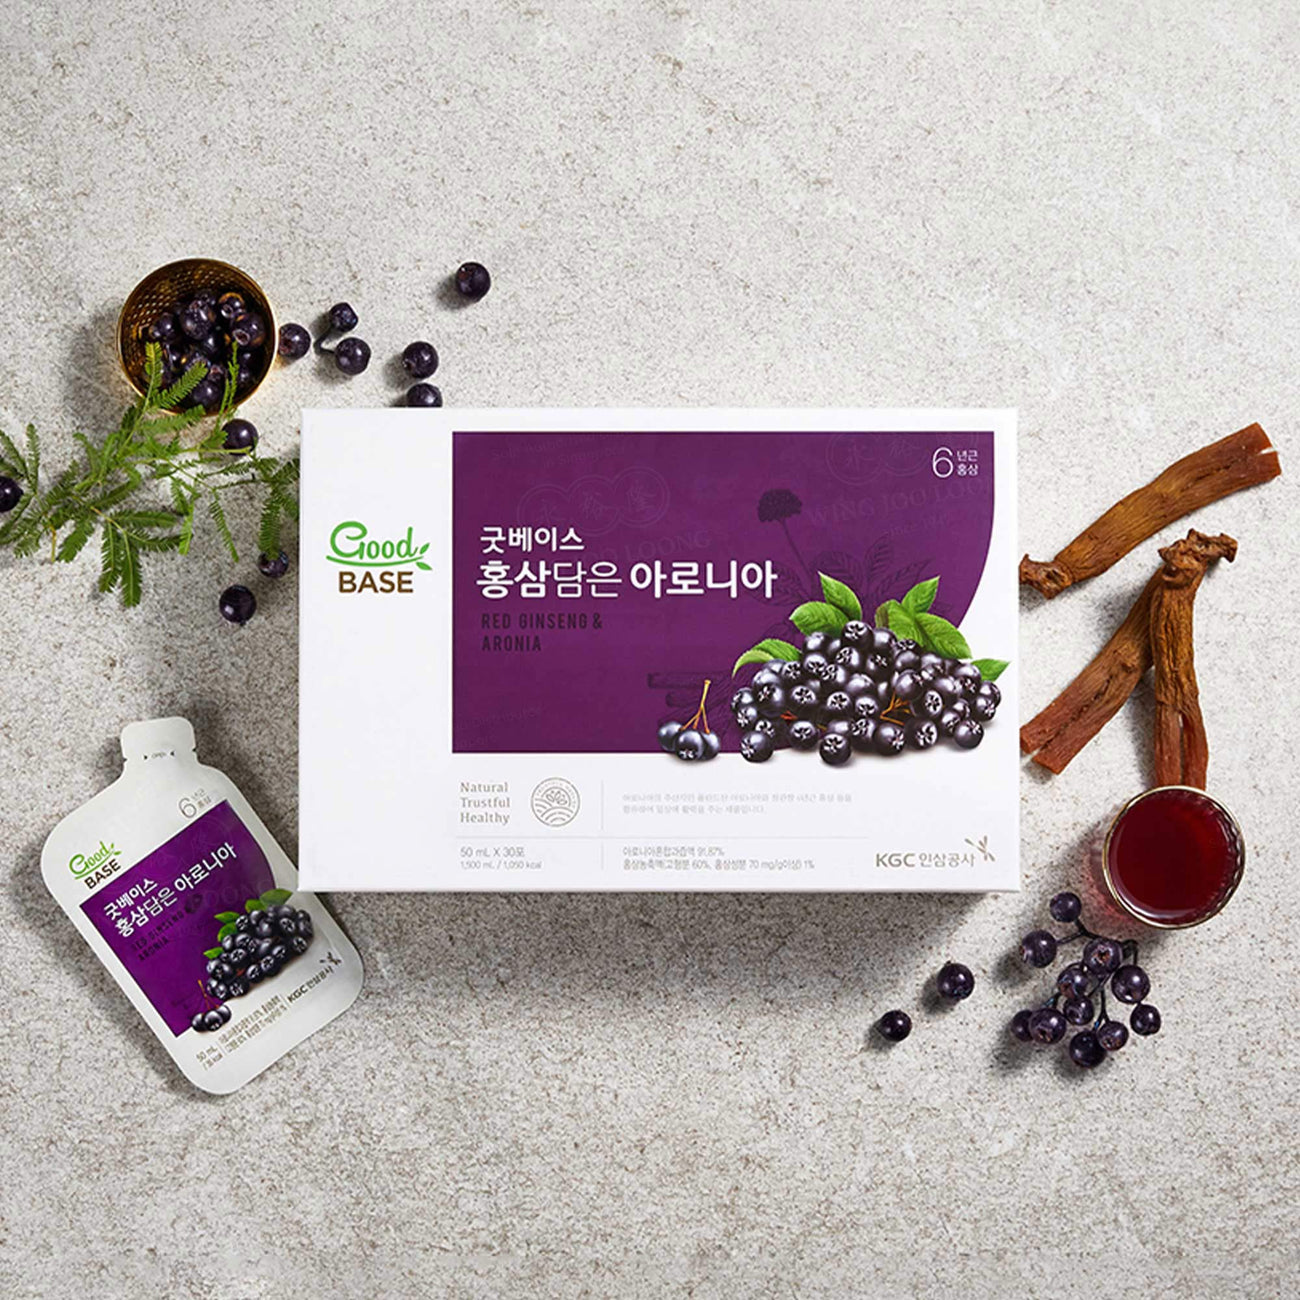 GoodBASE Aronia with Korean Red Ginseng Pouch 高丽参野樱莓袋装